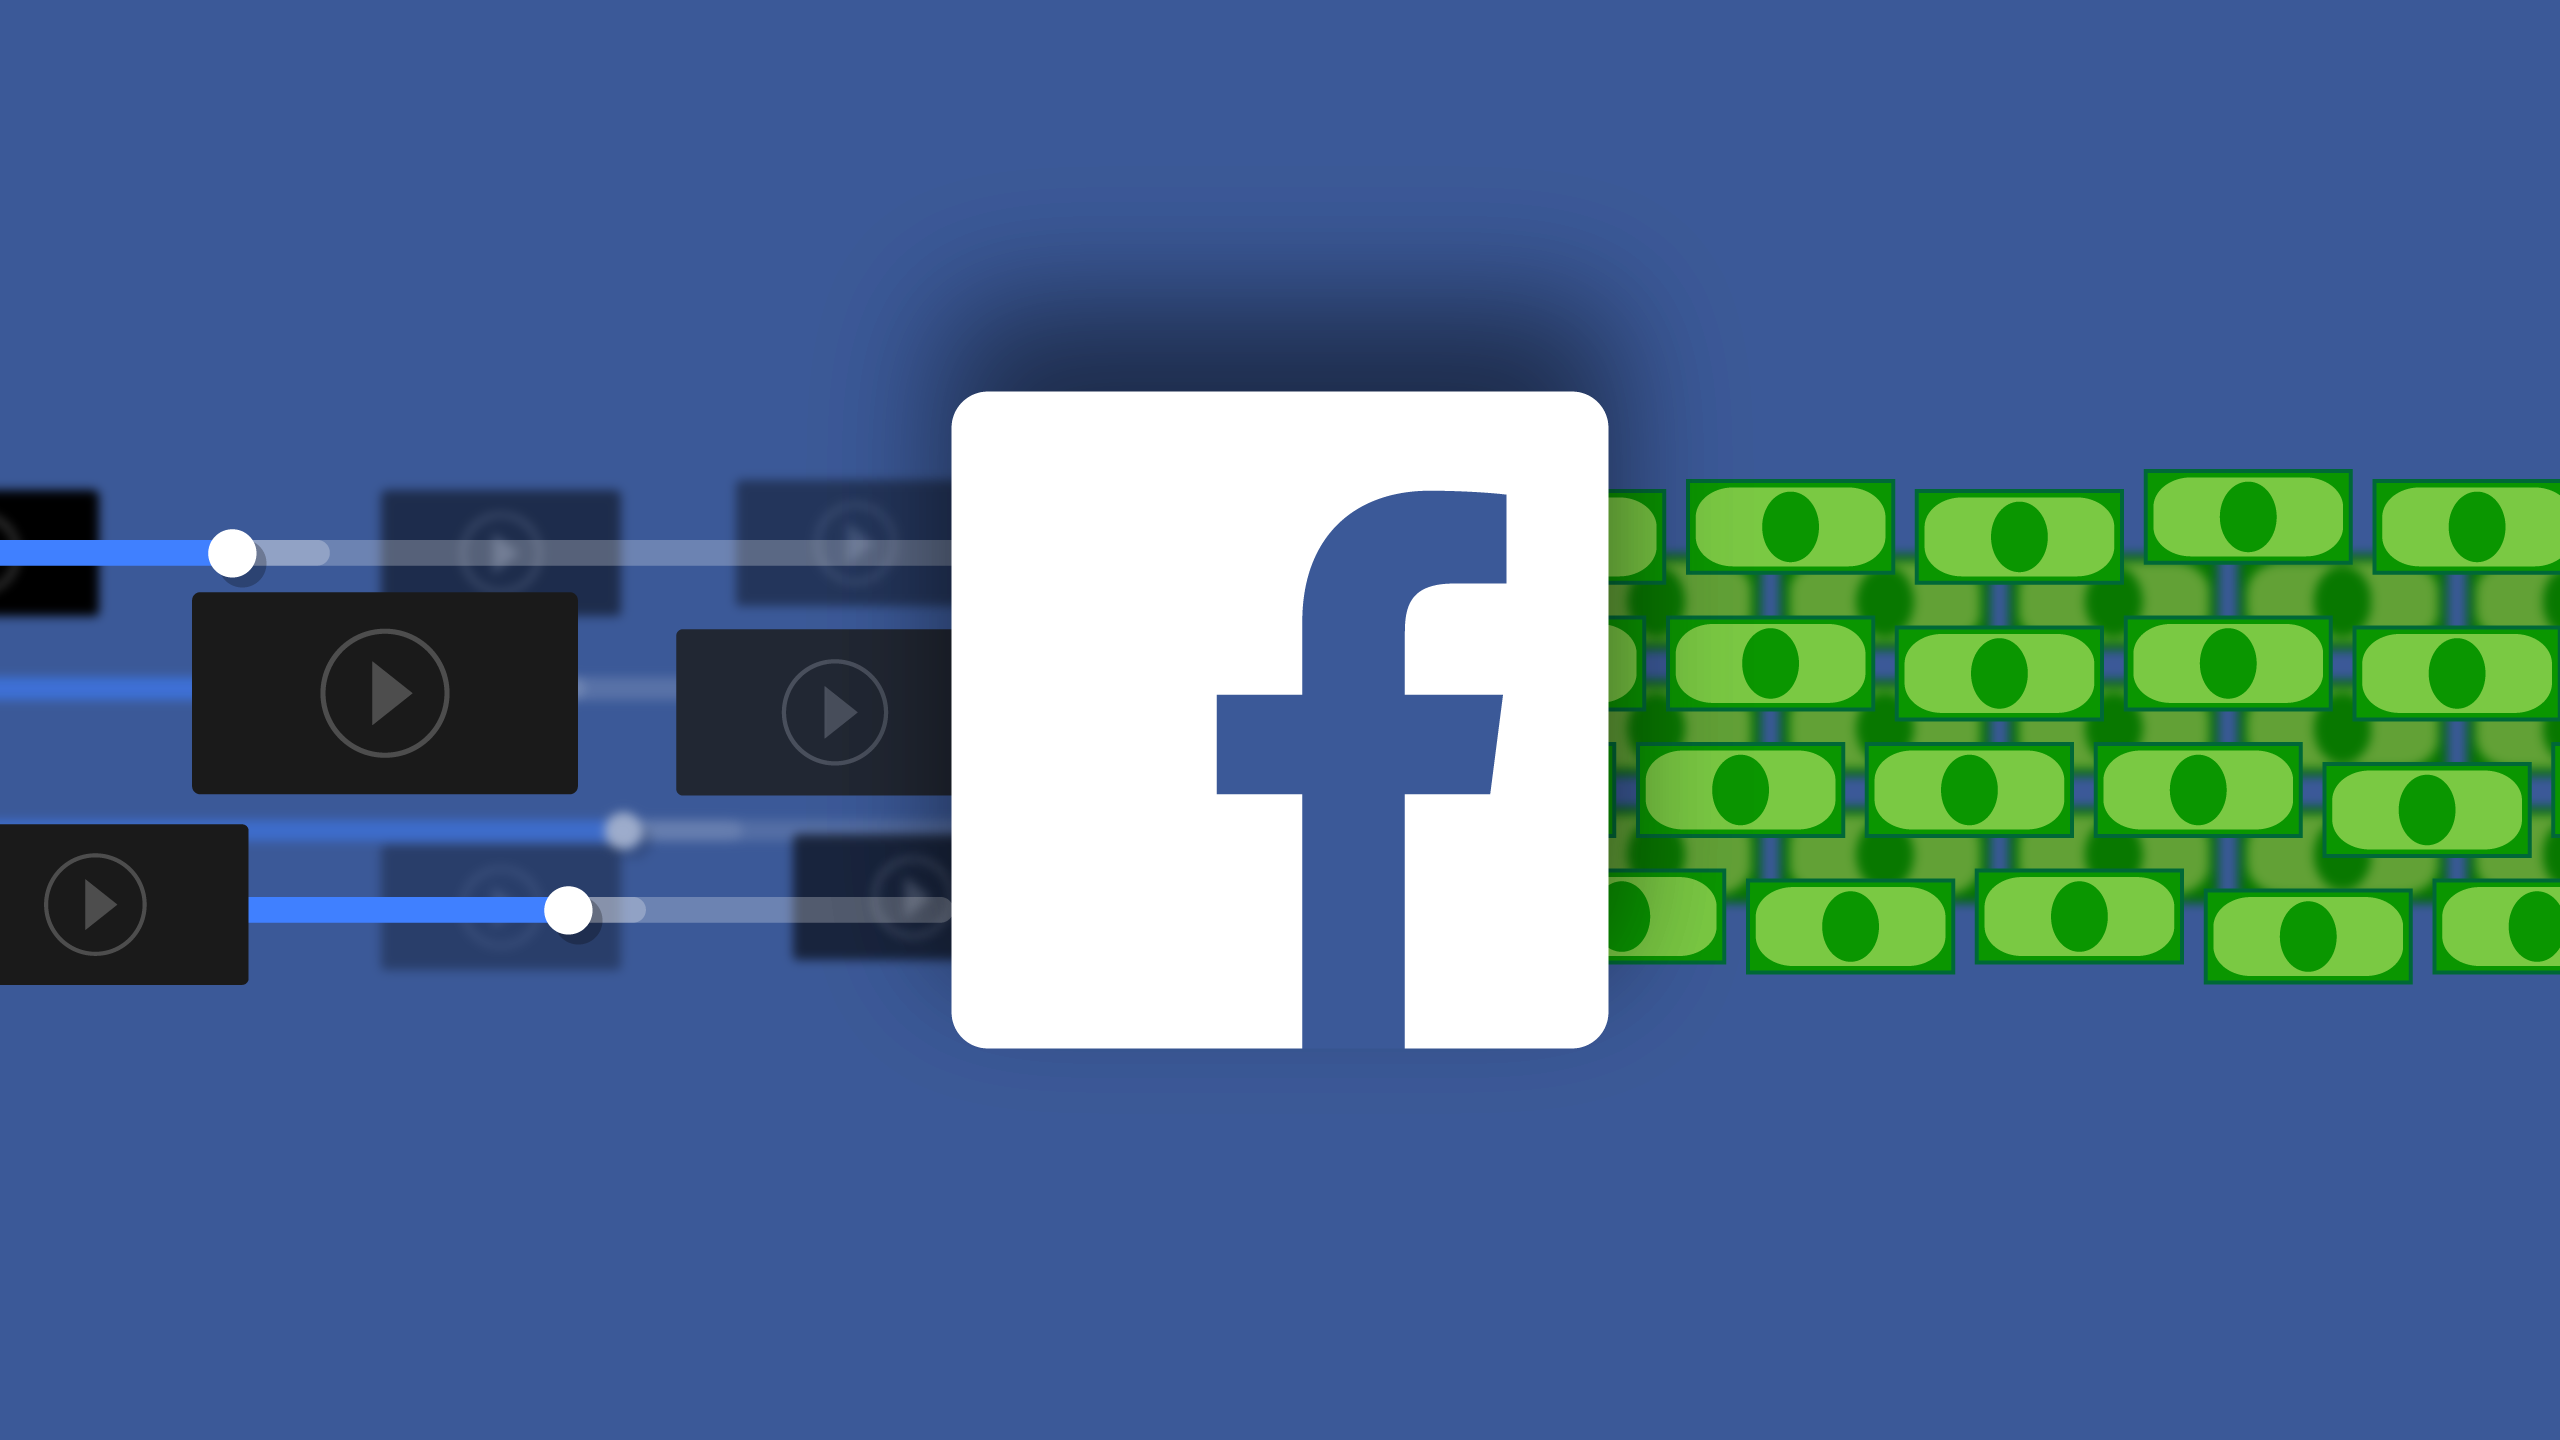 Facebook to pay users $5 for voice recordings